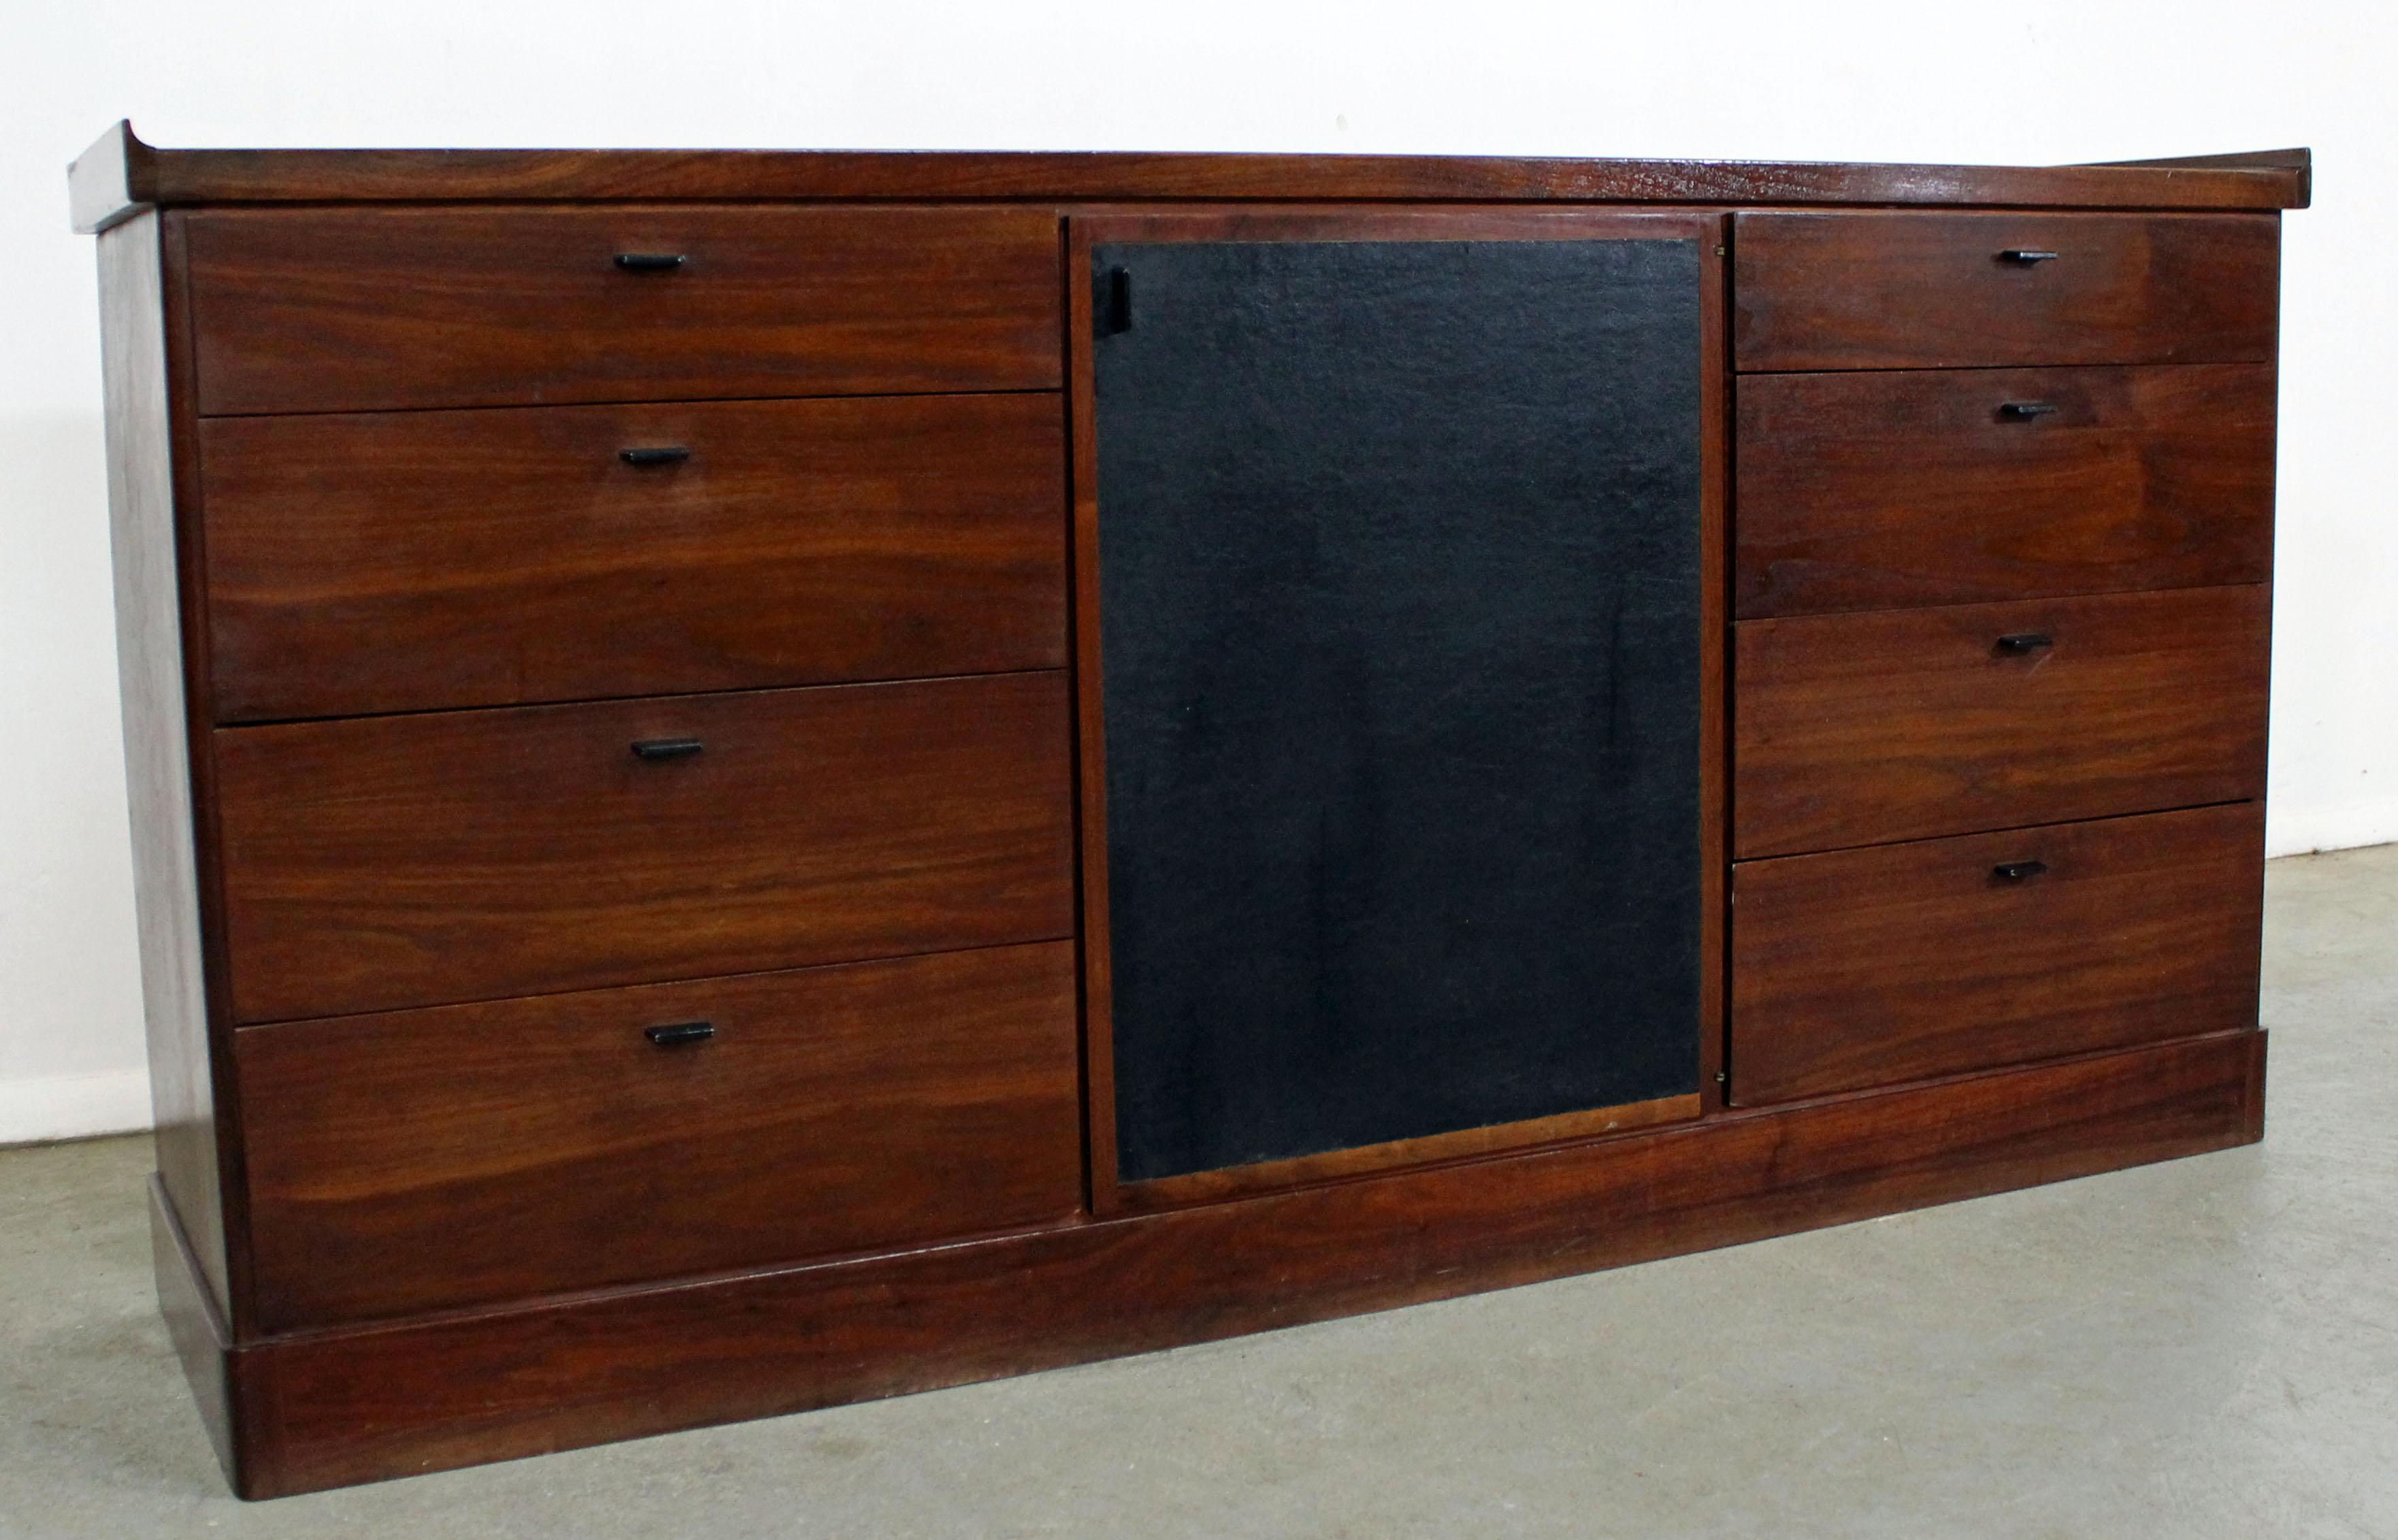 Offered is a Mid-Century Modern walnut credenza. Features flared edges, 12 drawers altogether, with 4 hidden behind a black door. Can be used as a dresser, sideboard, or credenza. It is in very good condition for its age, shows some age wear